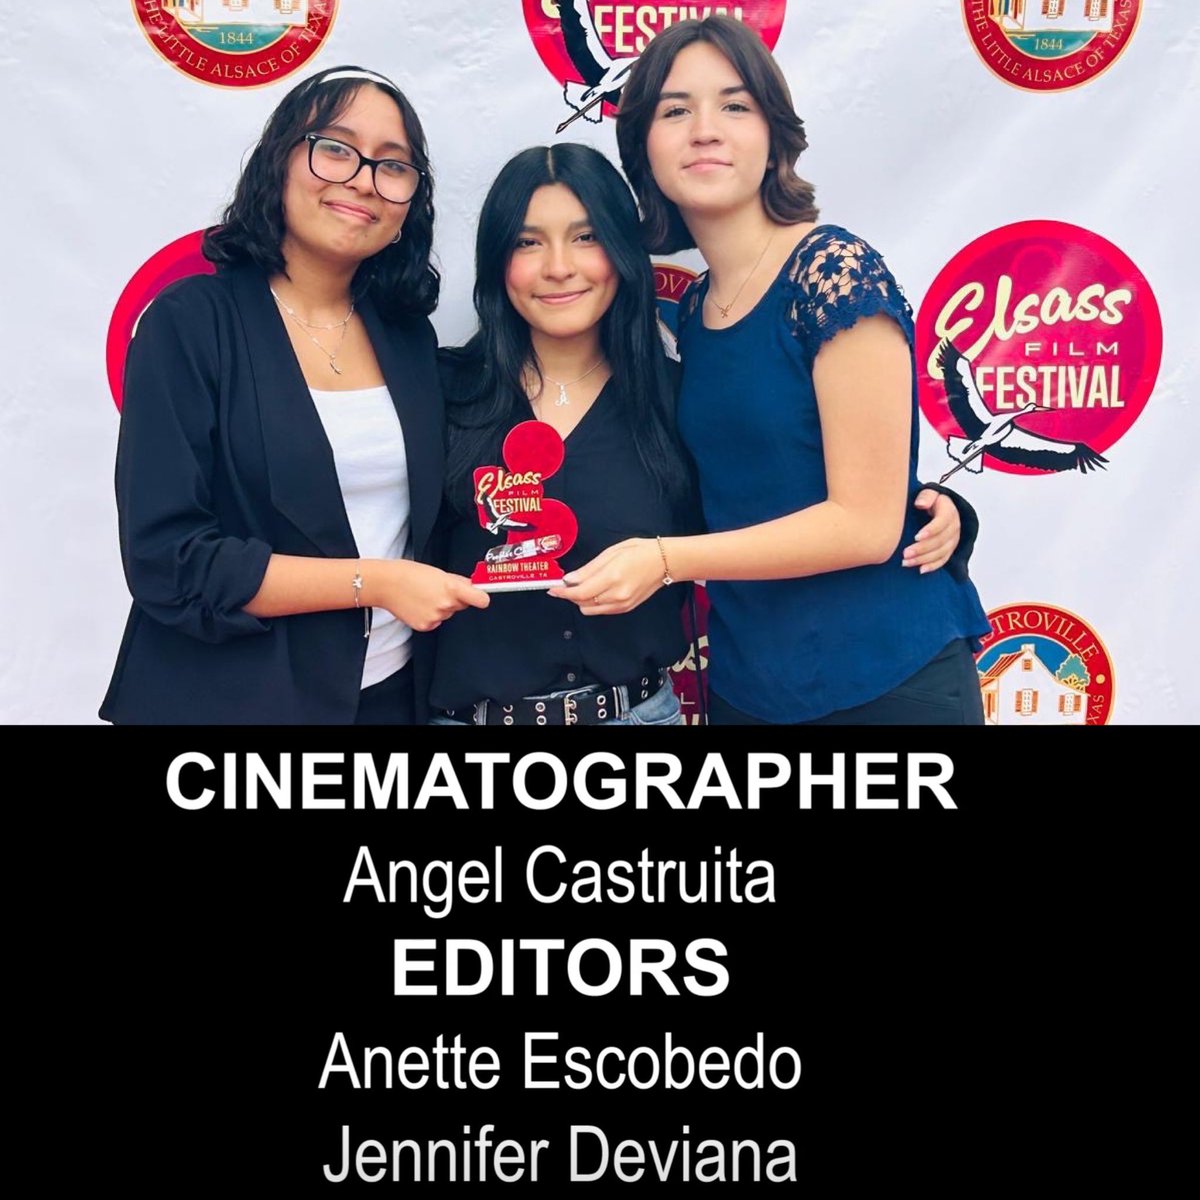 Proud teacher moment to see my students’ work being recognized and awarded for all their hard work!👏🎉 @ Elssa’s Film Festival in Castroville this past 5/4/24 @NISDComArts #nisdsuperiorcte @NicoleEEsparza @NISD_CTE Way to go guys!👏